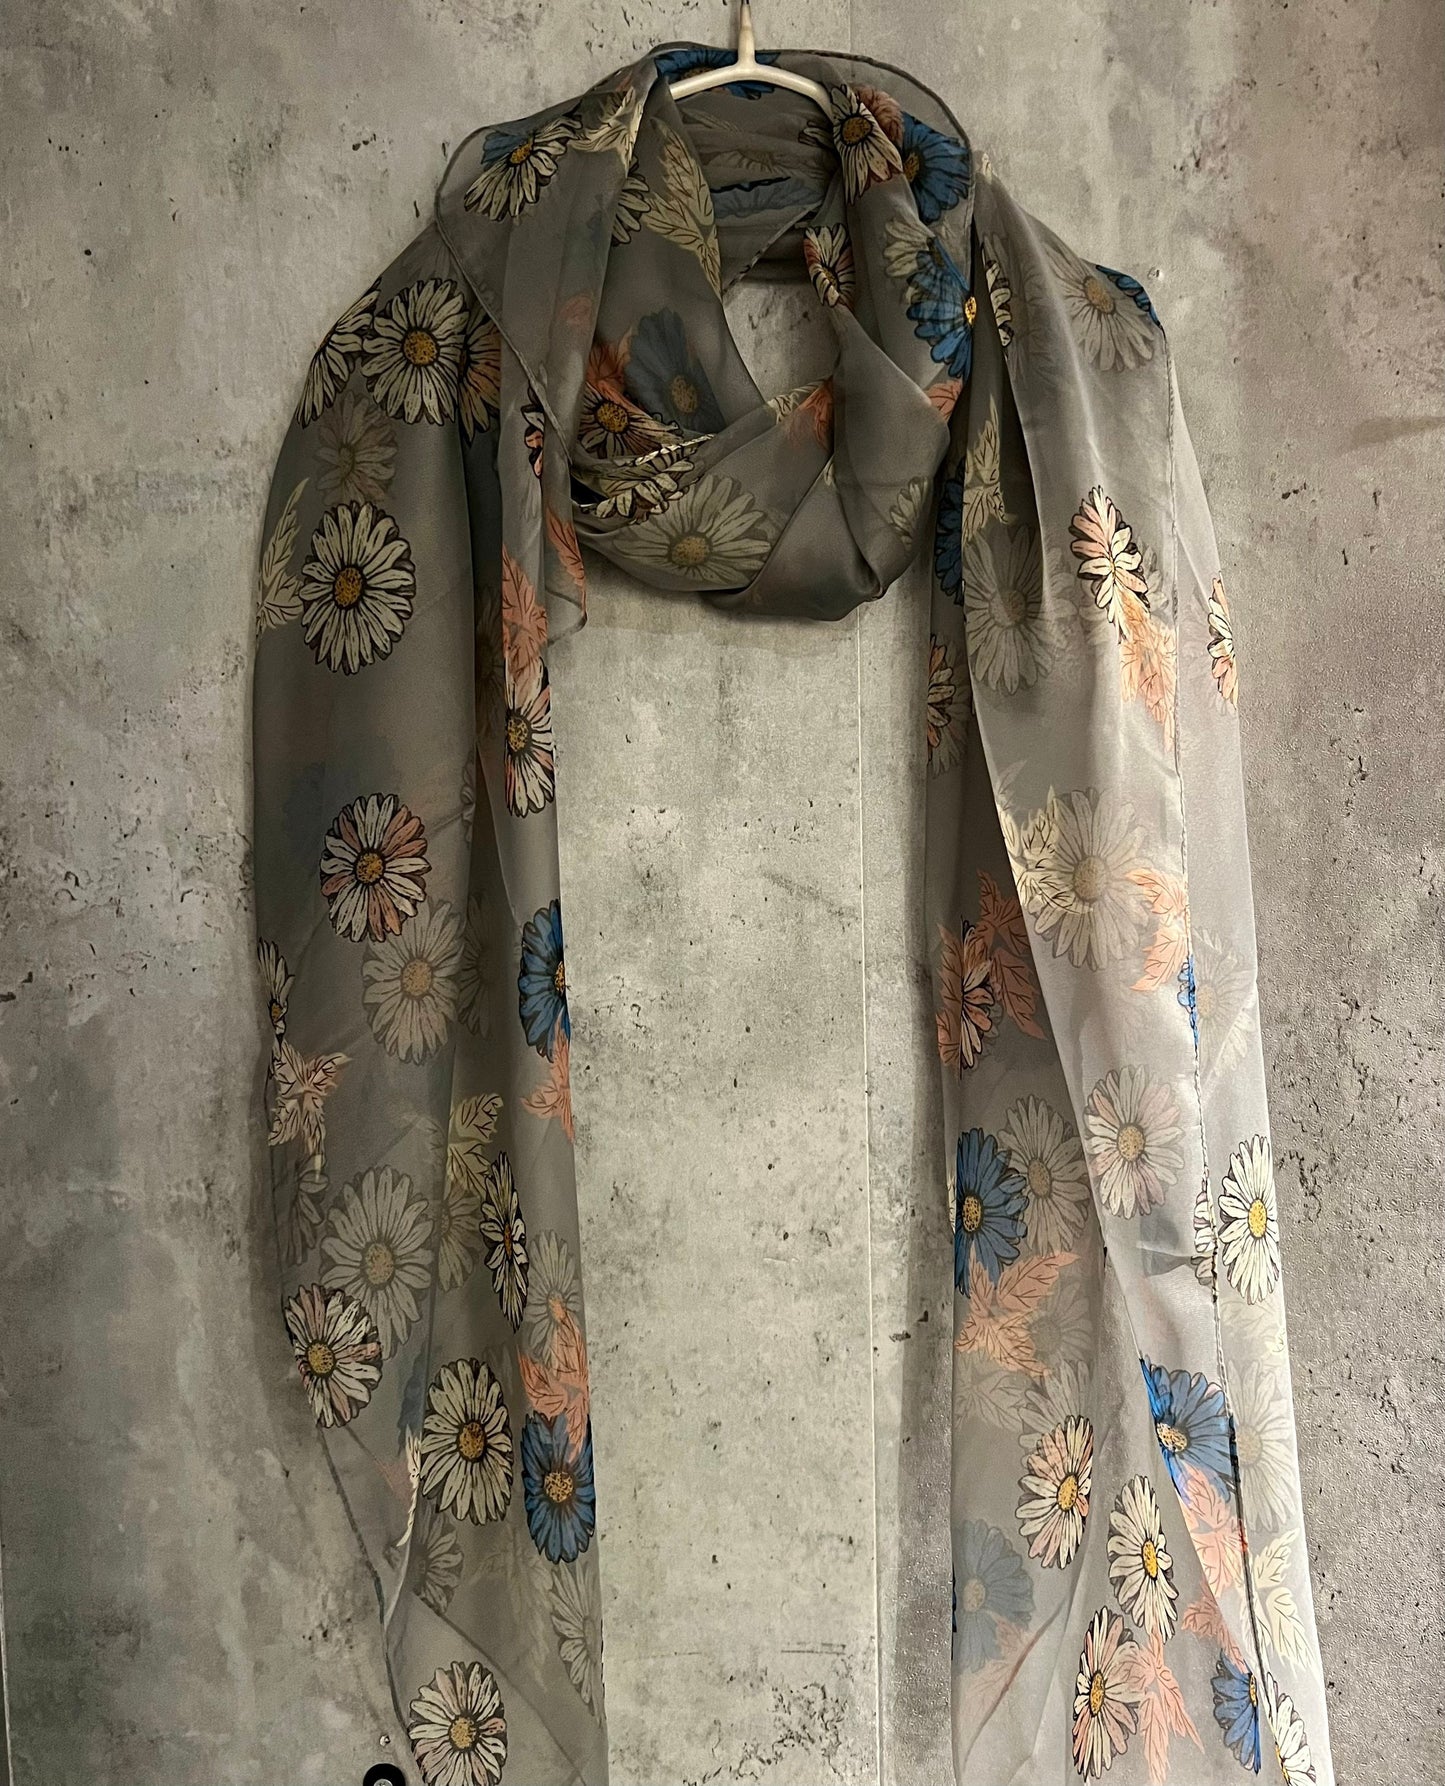 Daisy Flowers Pattern Grey Silk Scarf/Spring Summer Autumn Scarf/Gifts For Her Birthday Christmas/Gifts For Mum/Wedding Scarf/Evening Scarf